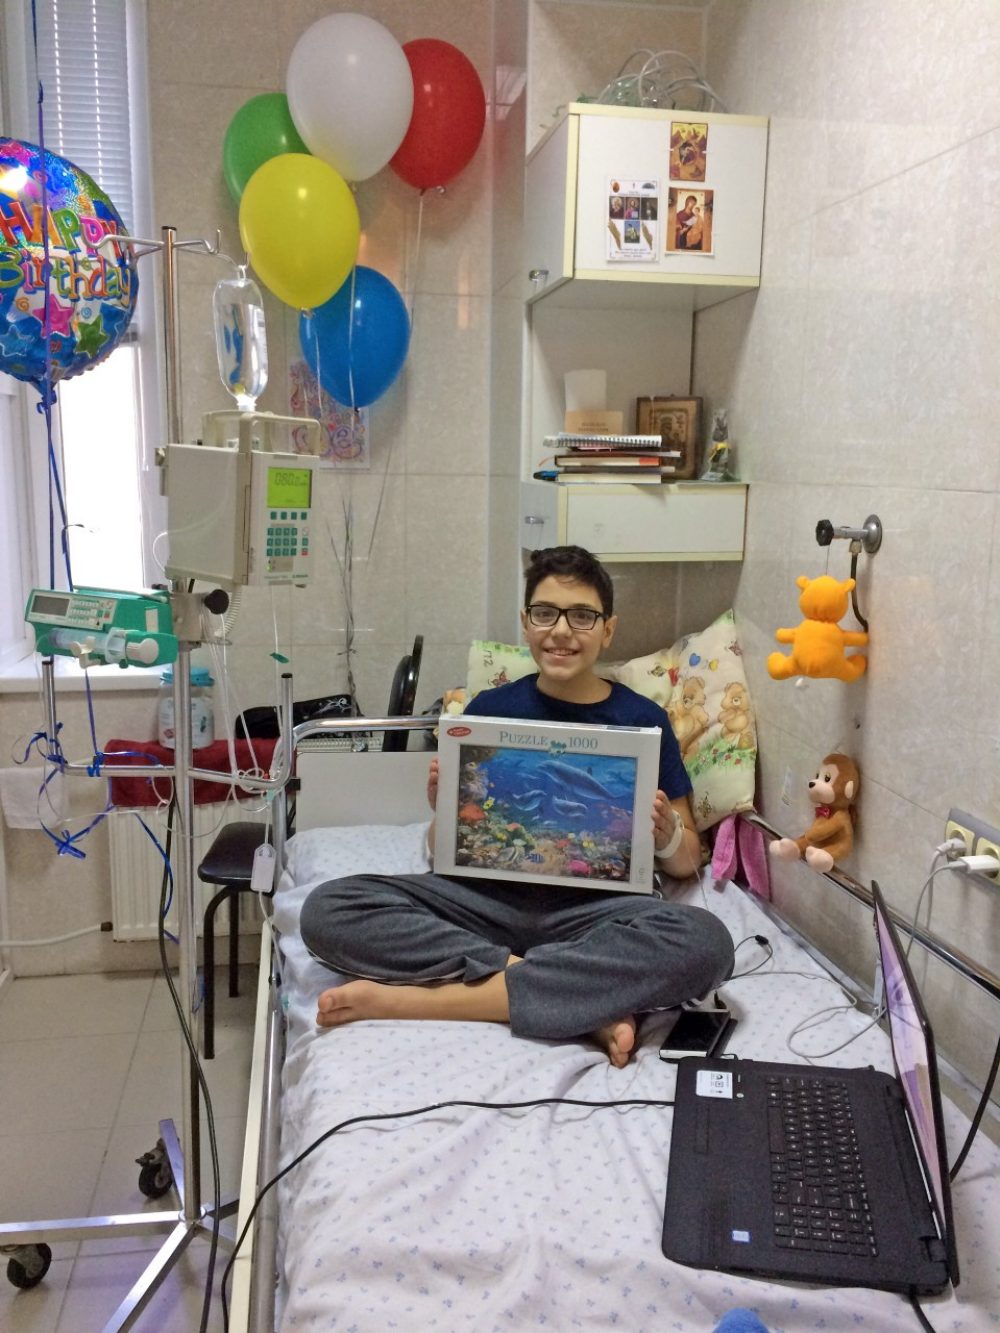 Gheorghe celebrates his birthday in the hospital.